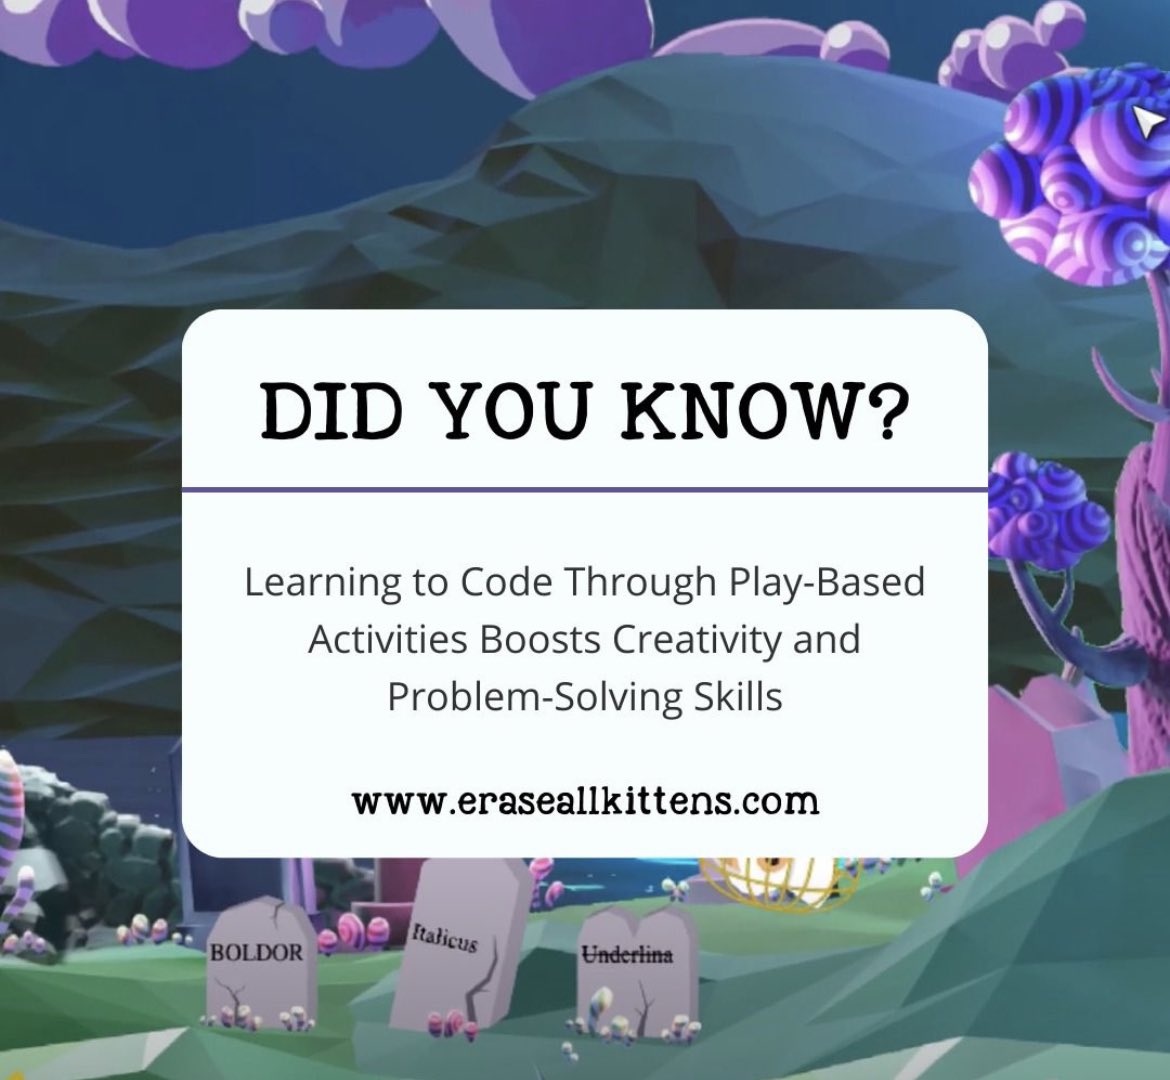 Did you know that learning to code through play-based activities offers long-lasting benefits for kids? Try out our free demo here! eraseallkittens.com #EraseAllKittens #Coding #Stem #EdTech